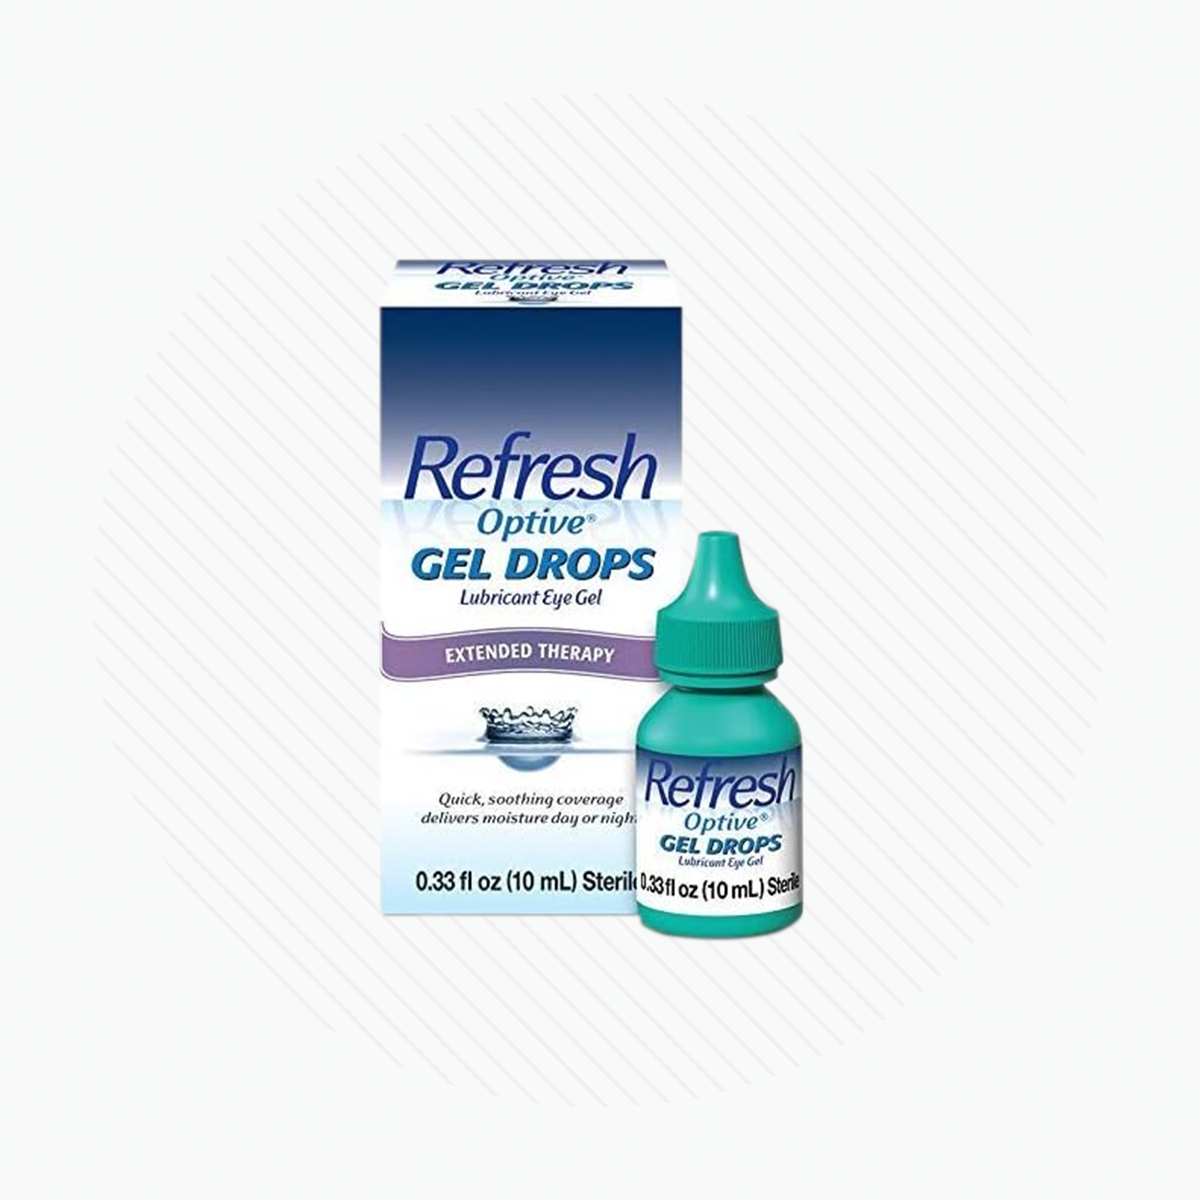 Refresh Optive Gel Drops Extended Therapy (10mL Bottle)